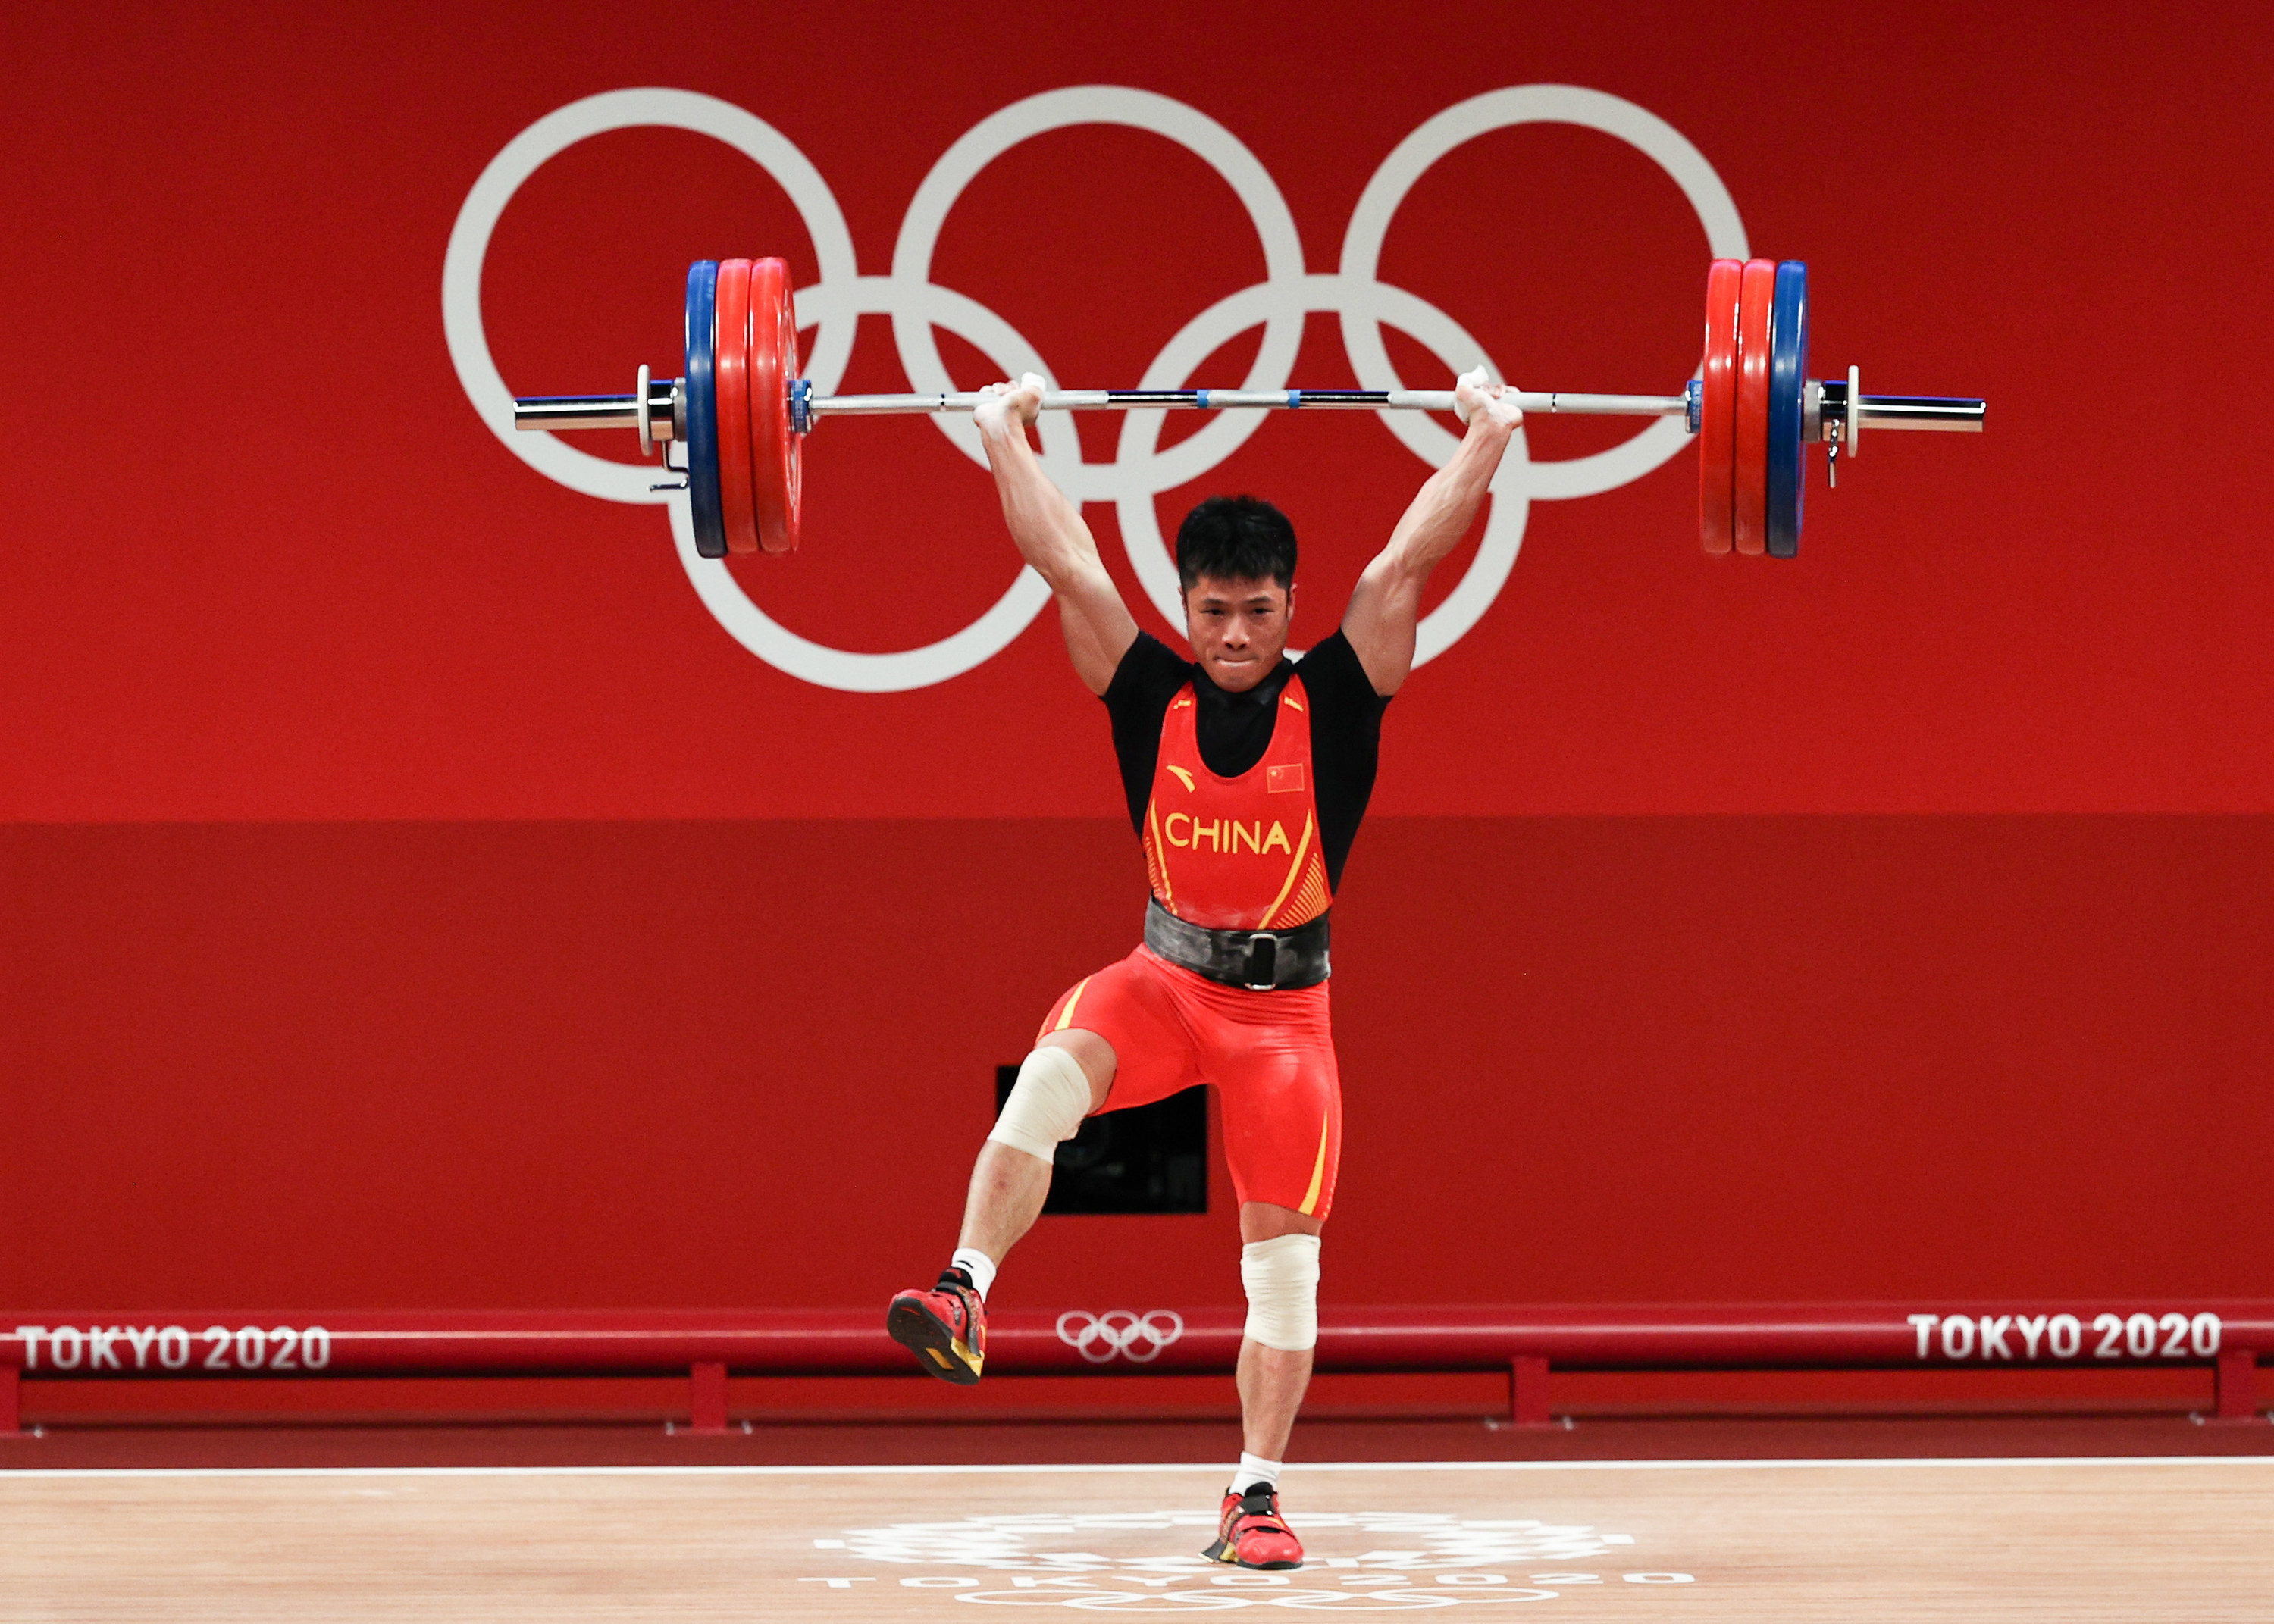 Li lifts as he stands on one leg